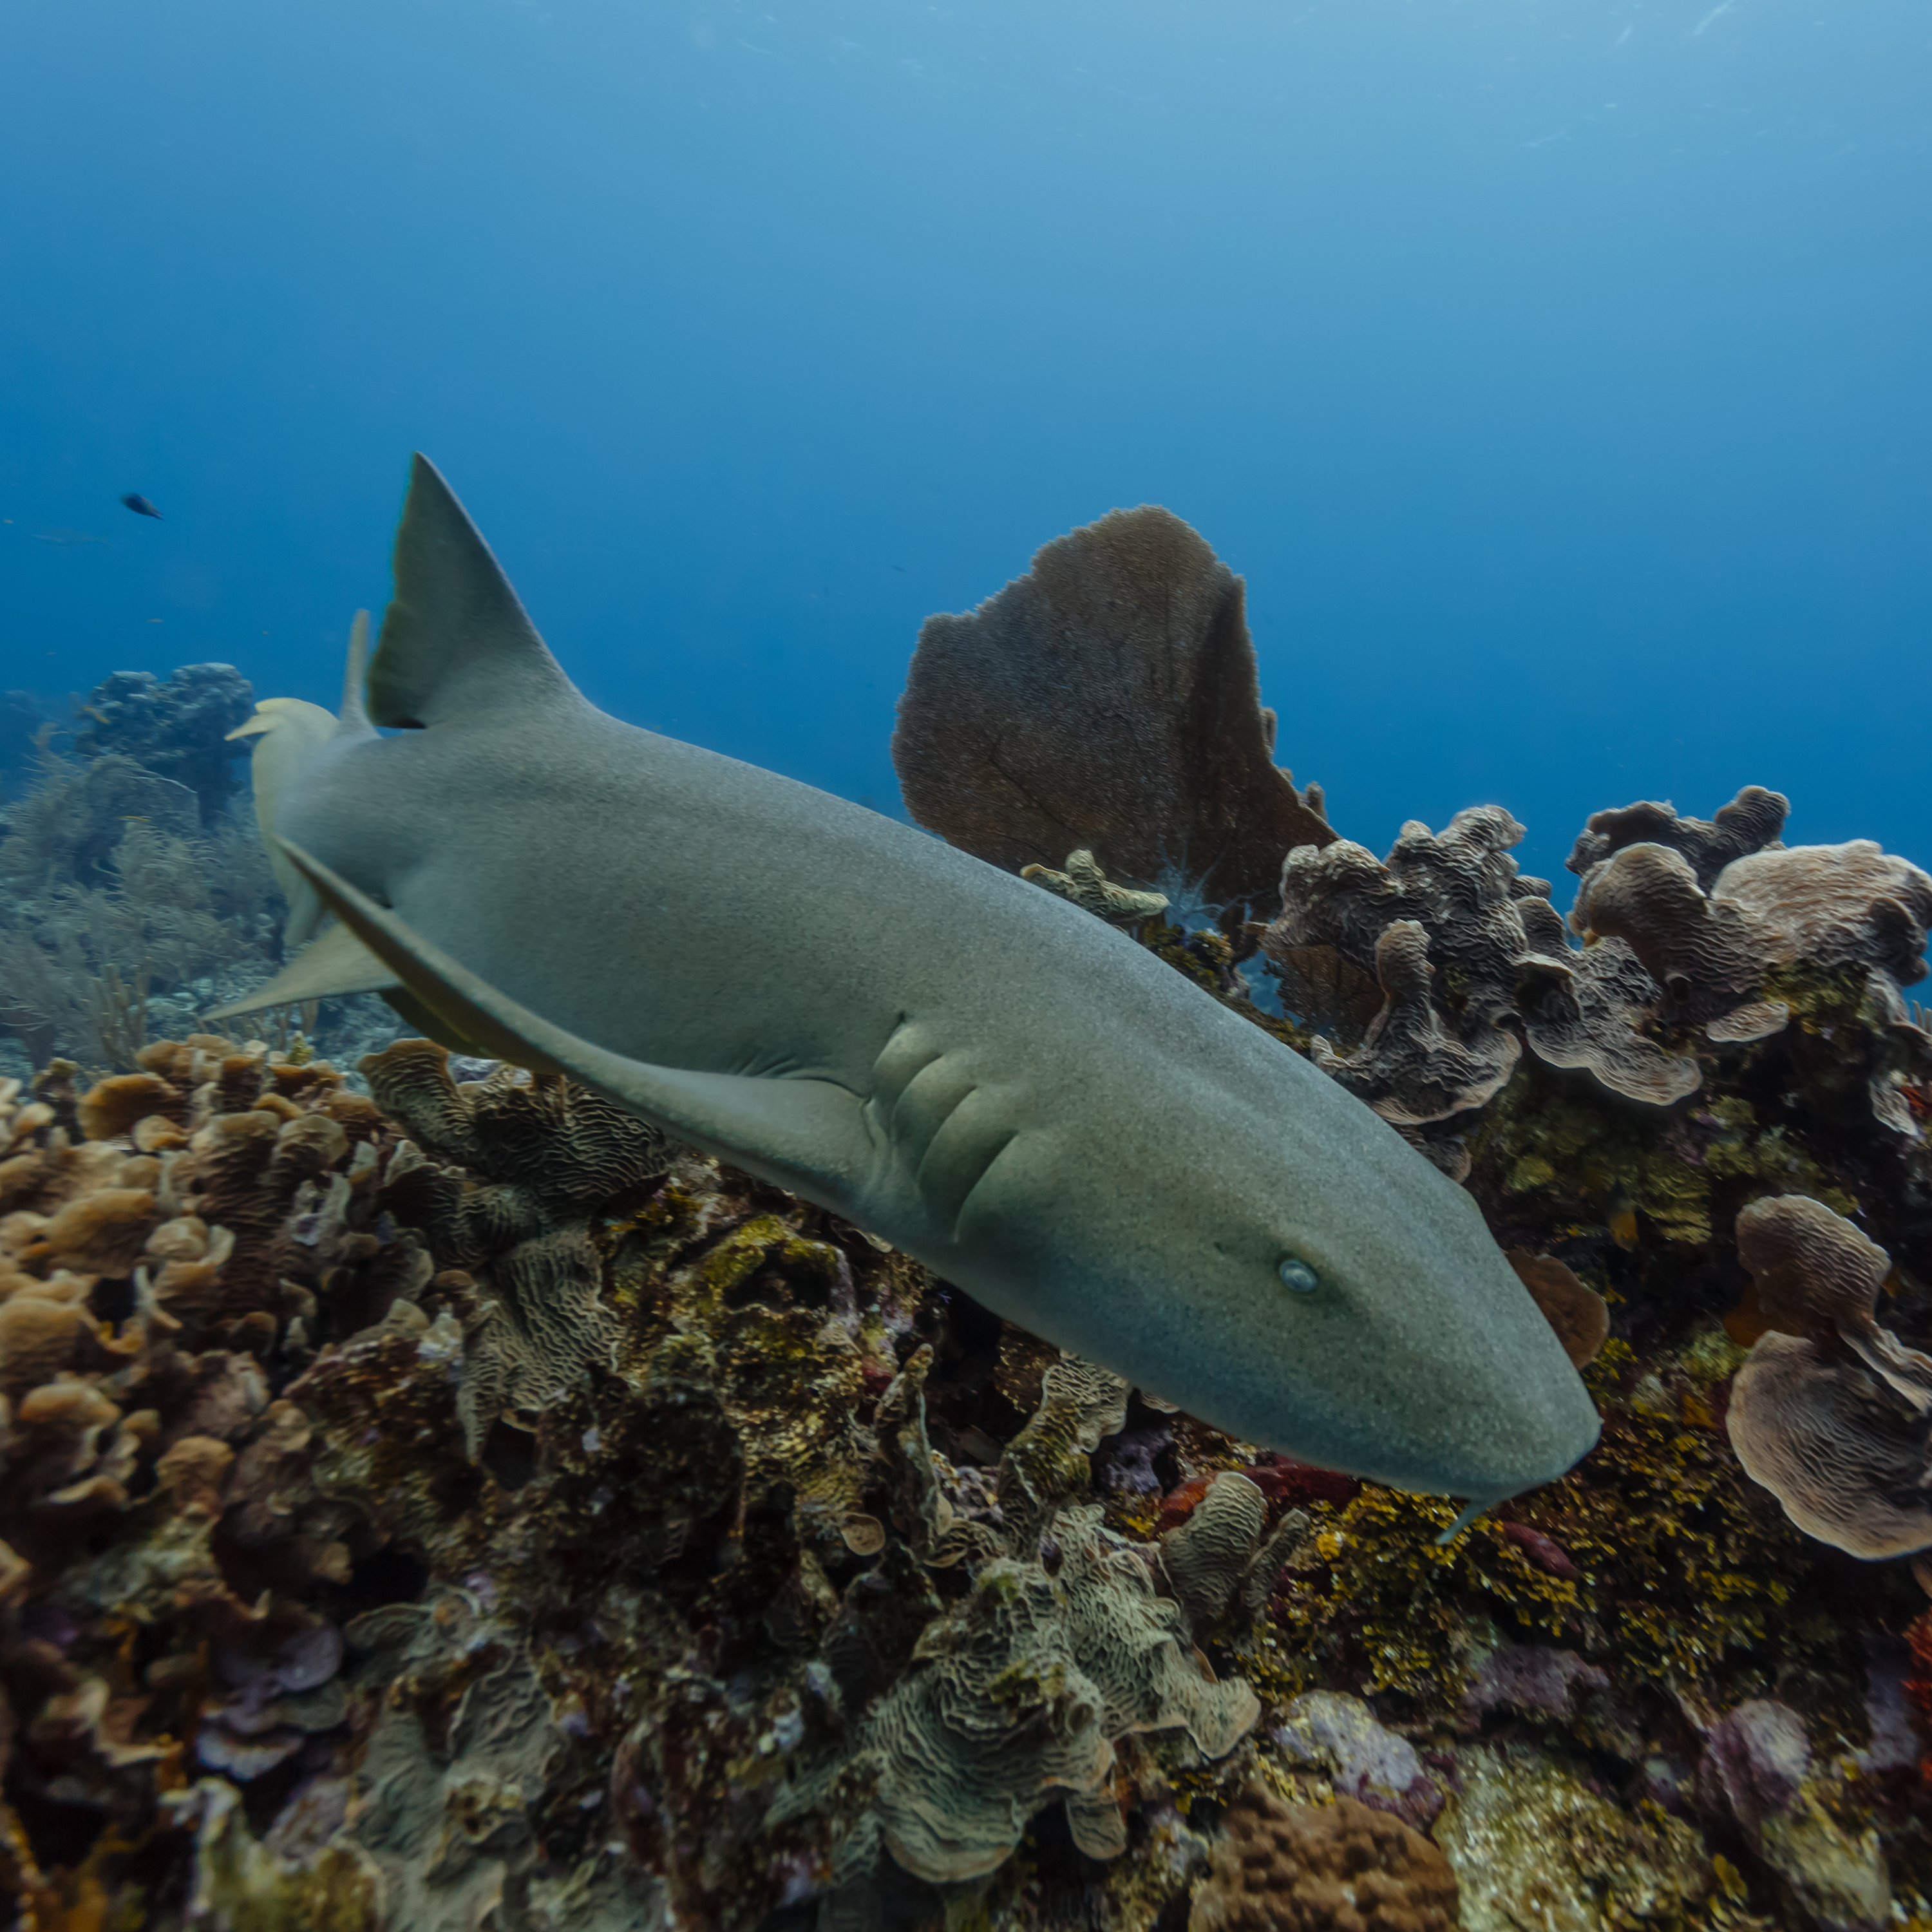 Belize in 2020 passed a comprehensive fisheries bill that allows for greater protections of endangered sharks